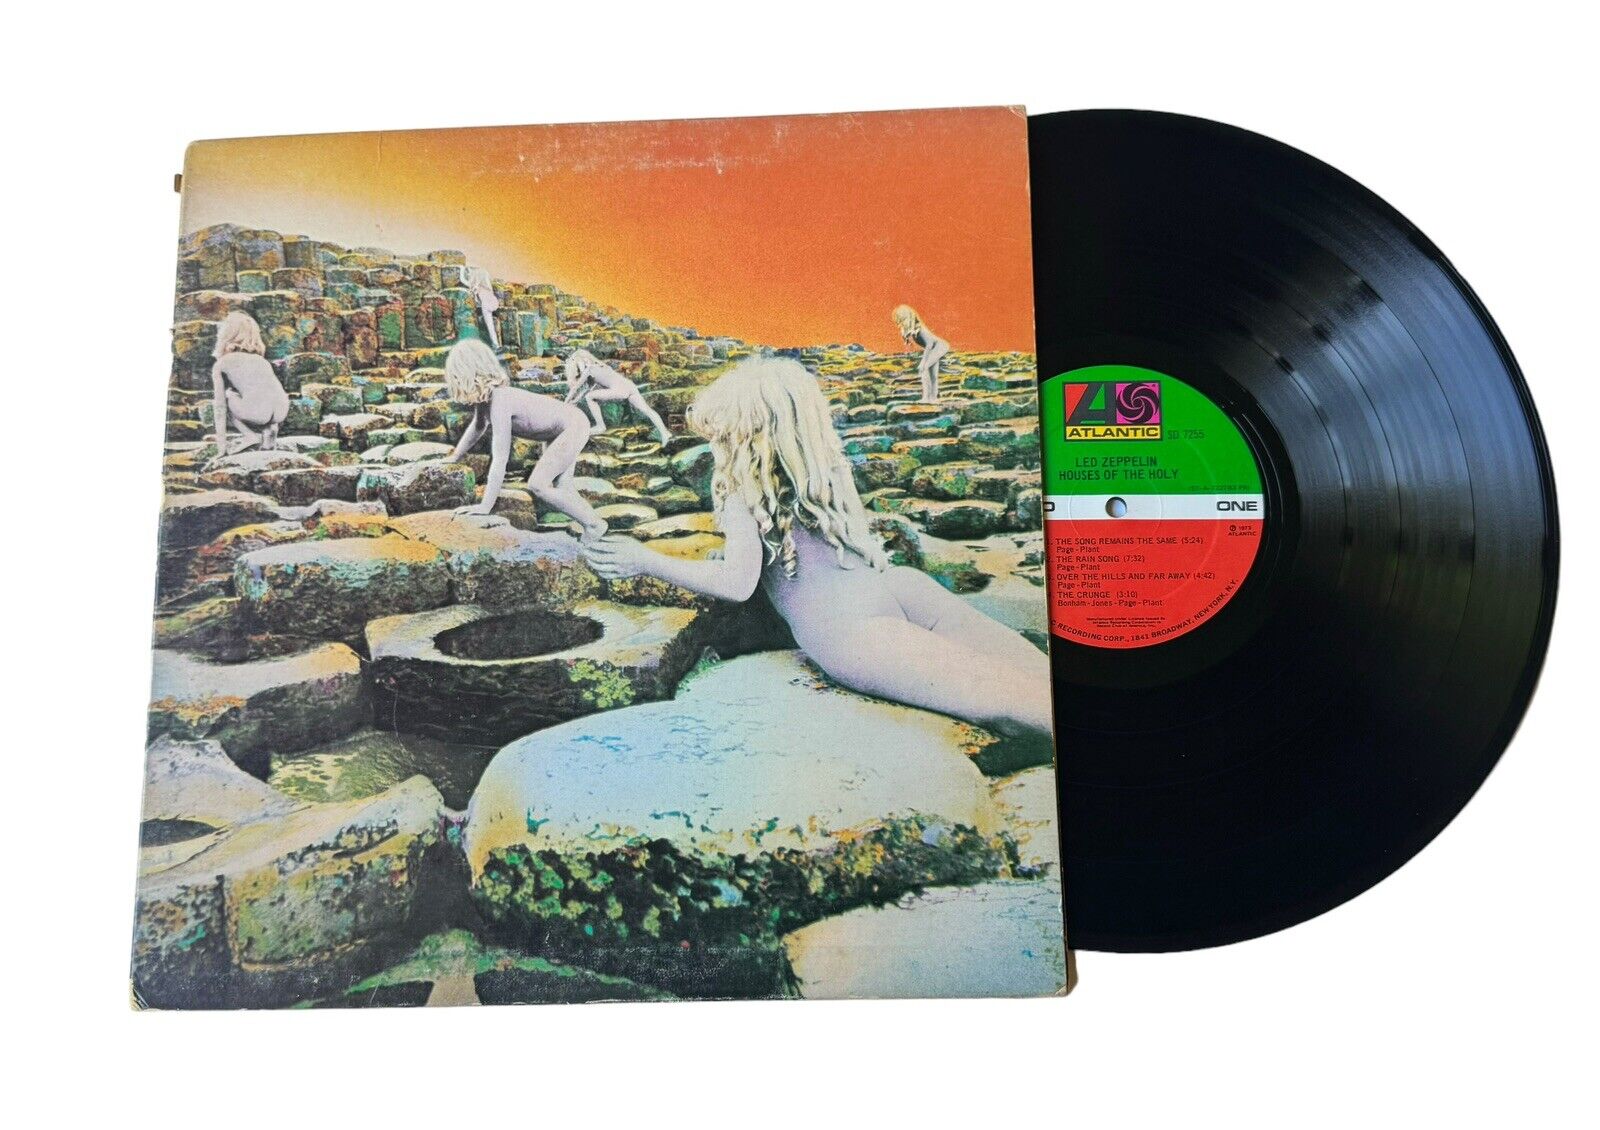 Led Zeppelin -Houses Of The Holy Vinyl-LP 1st Press (Presswell) -R Ludwig 1973